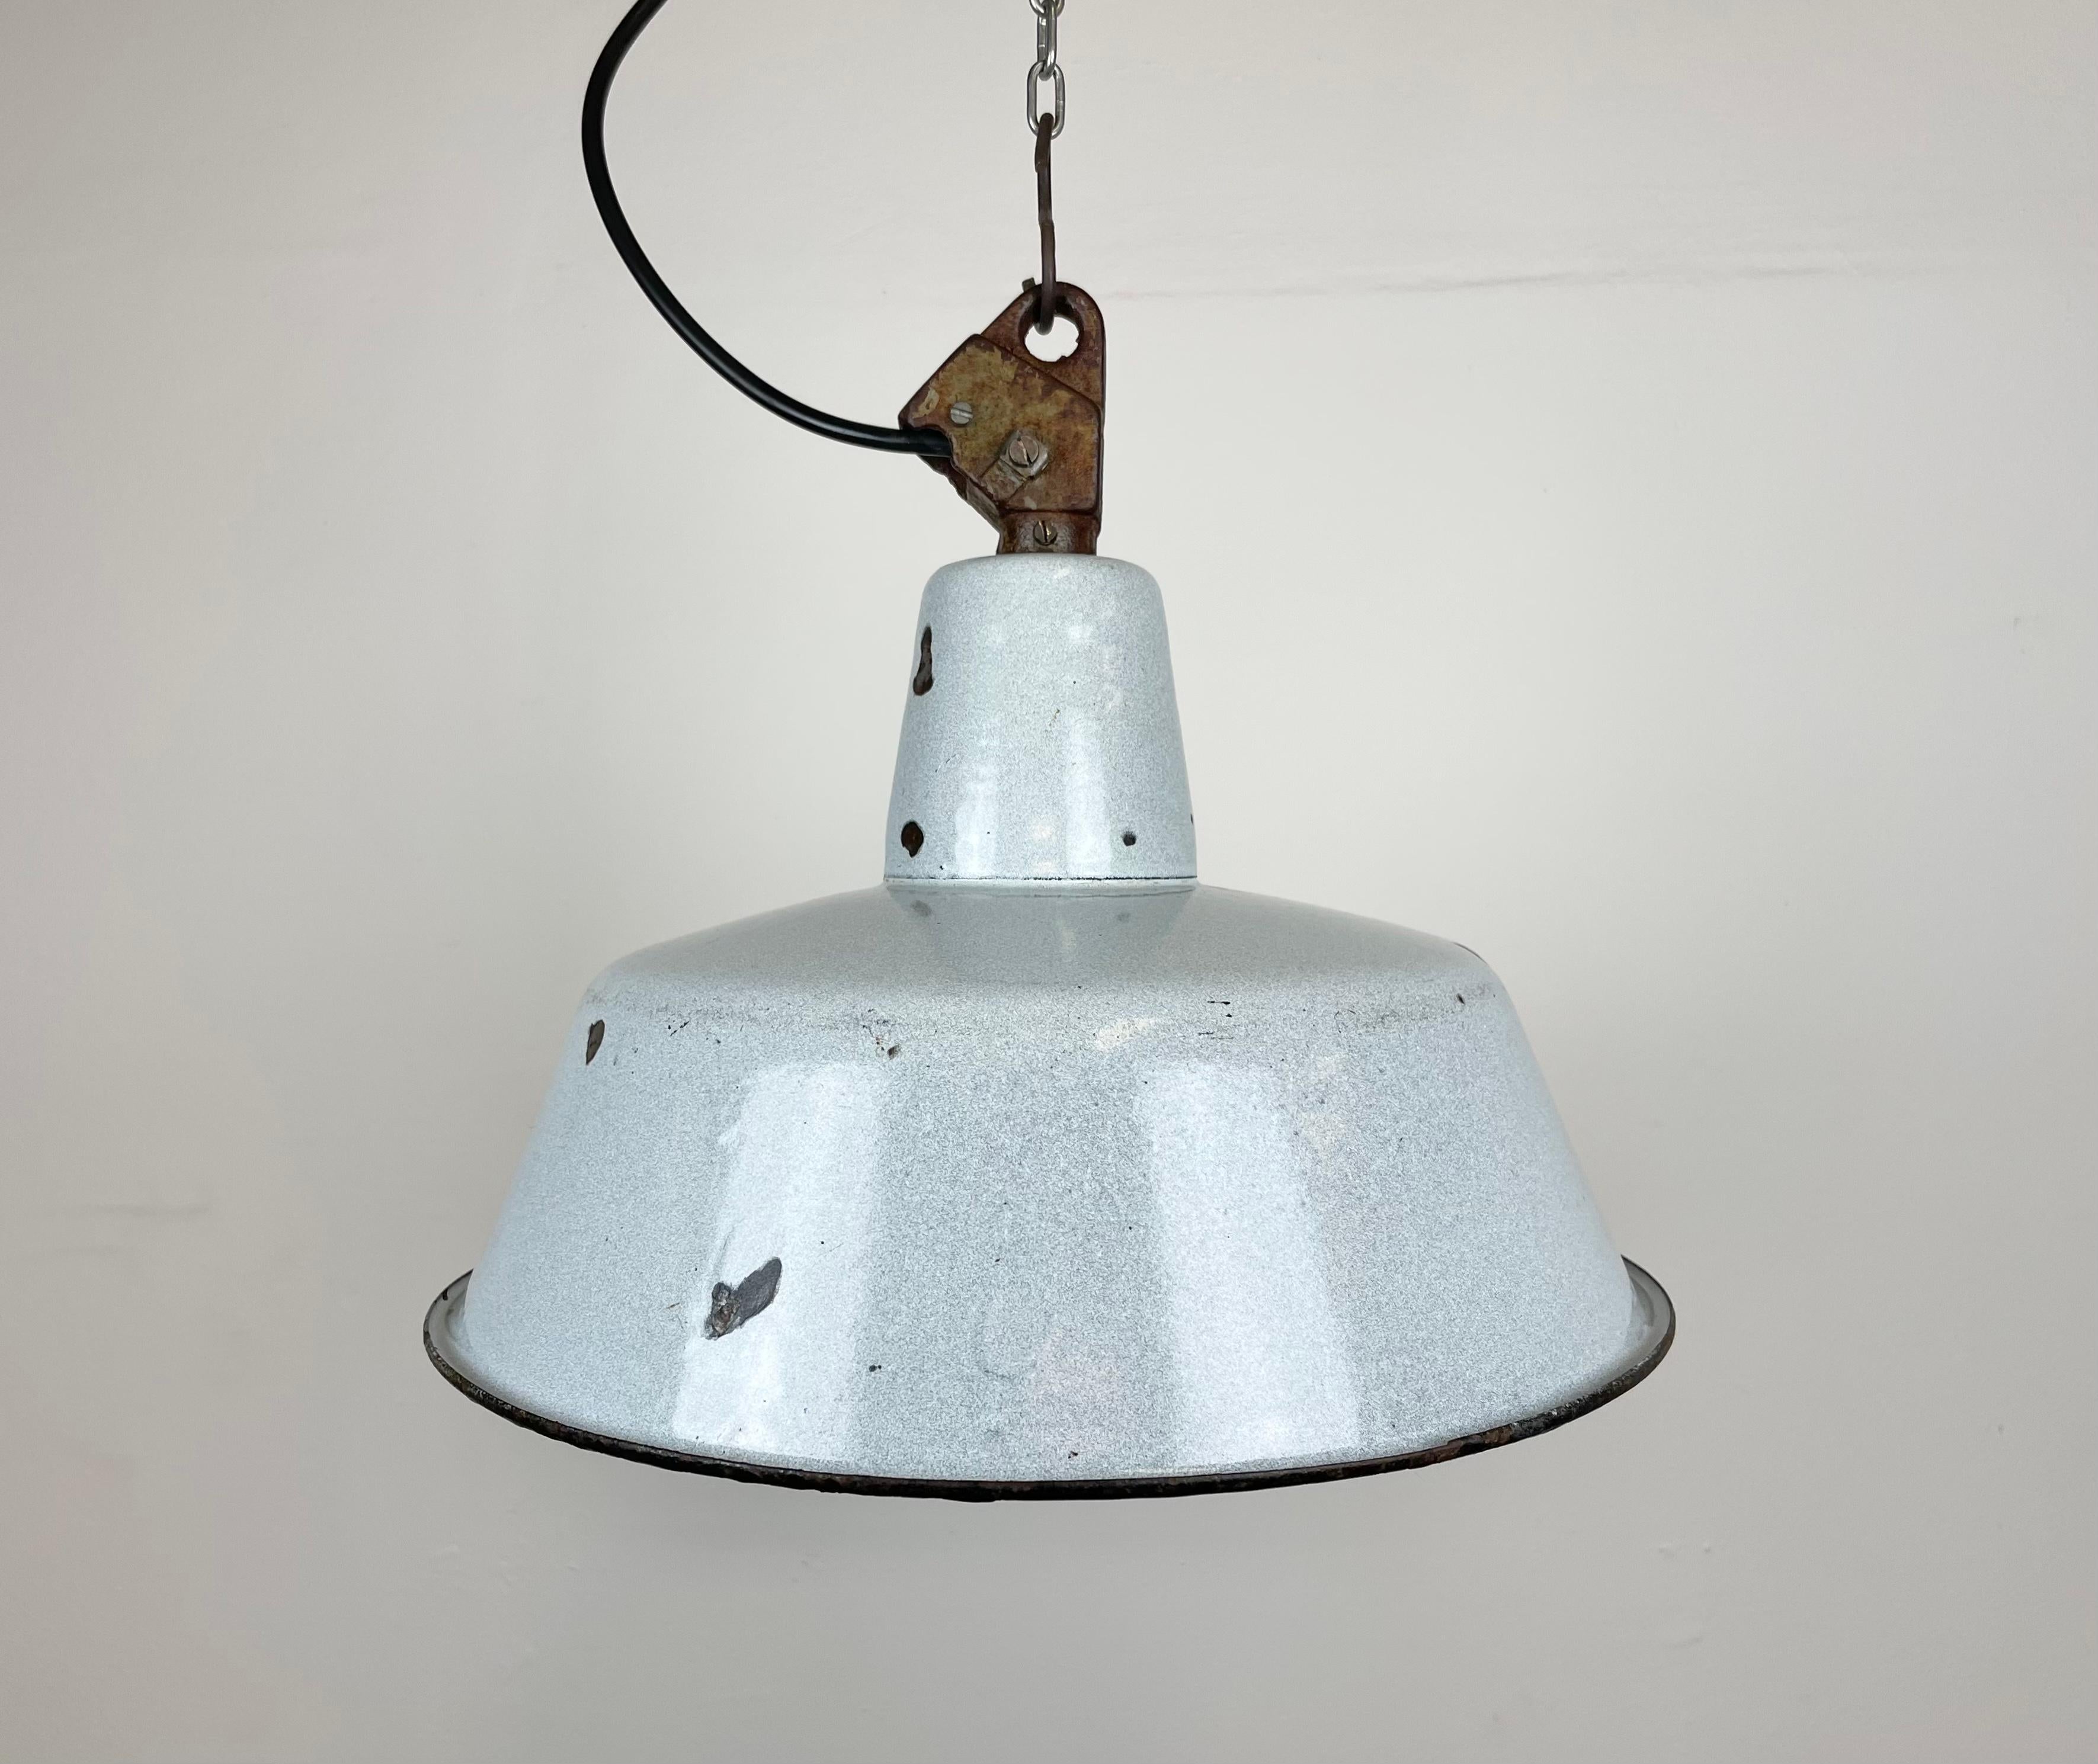 Industrial grey enamel pendant light made by KWE in Poland during the 1960s. White enamel inside the shade. Cast iron top. The porcelain socket requires E 27 light bulbs. New wire. Fully functional. The weight of the lamp is 1,5 kg.